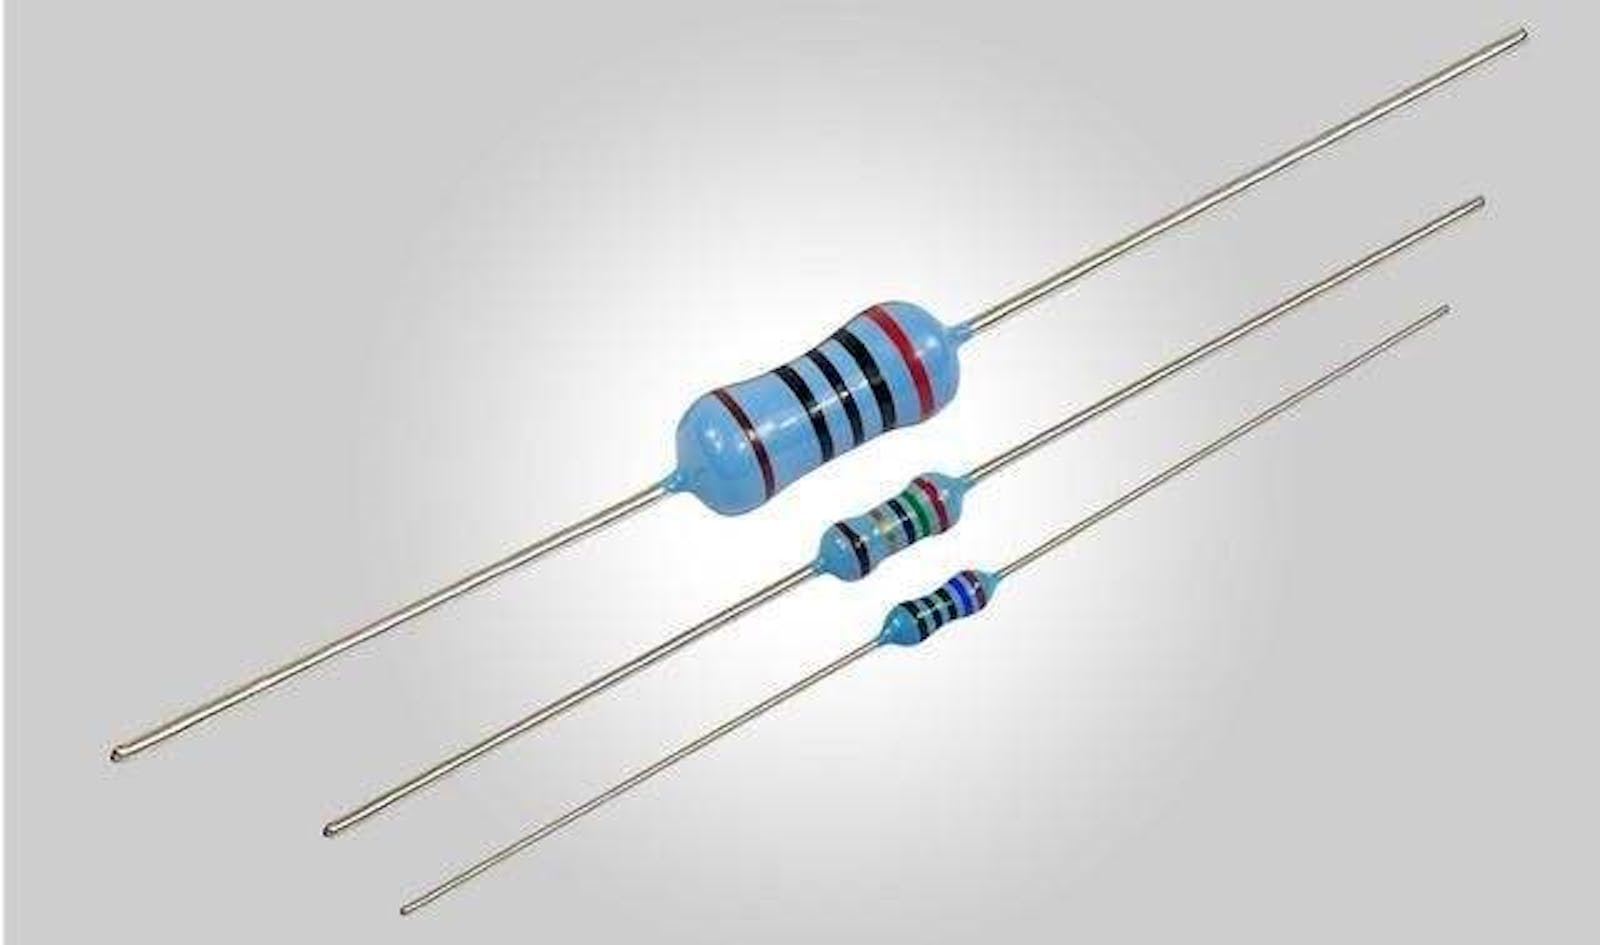 Resistor Colour Code - Resistor Colour Bands Table, Resistance Colour Code  Examples, and FAQs